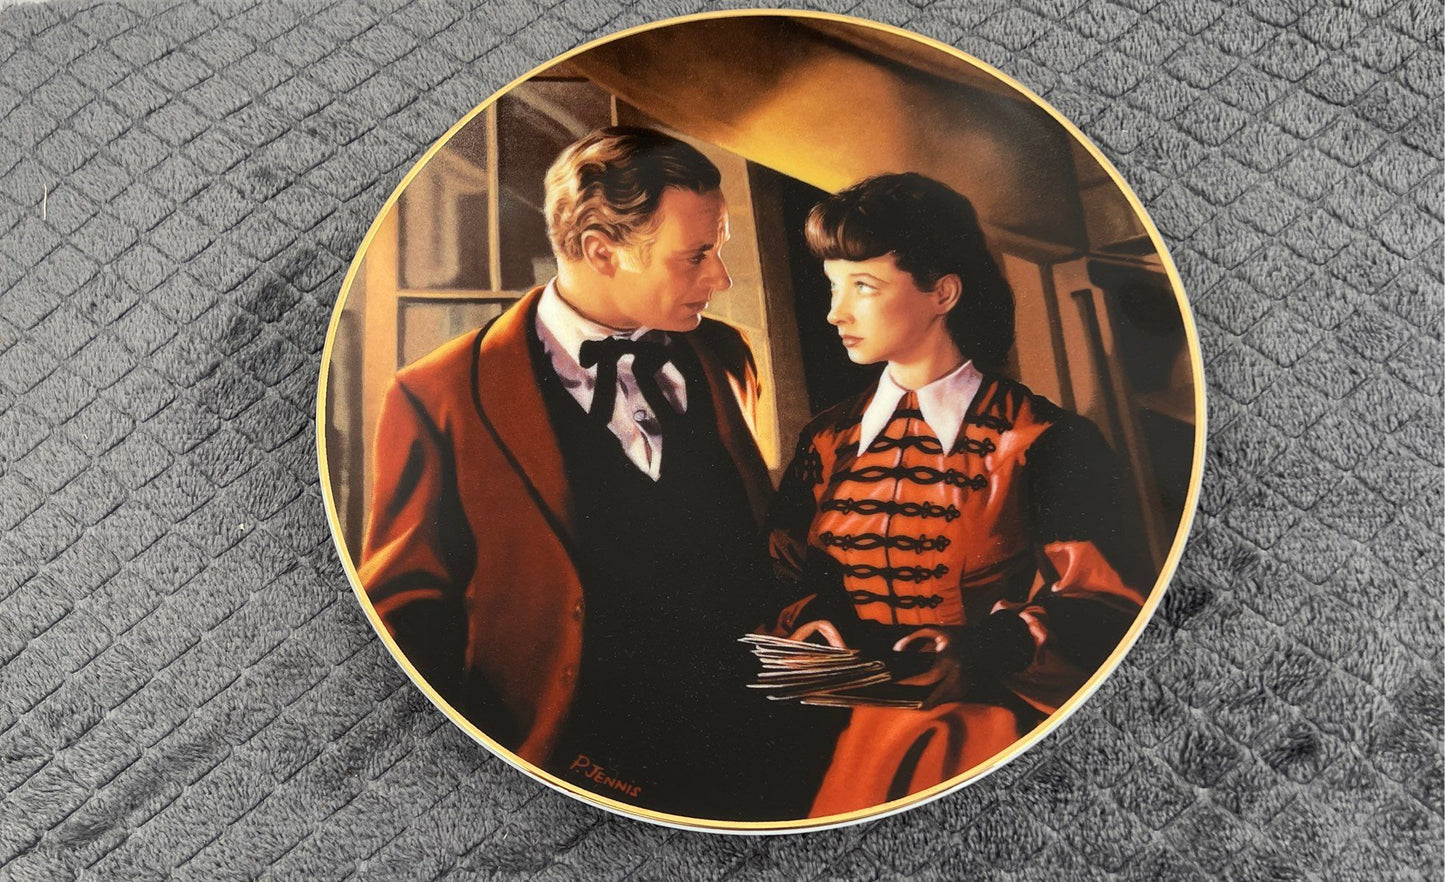 W.S. George Gone With The Wind Collector Plates Lot Of 2 By Paul Jennis-1992